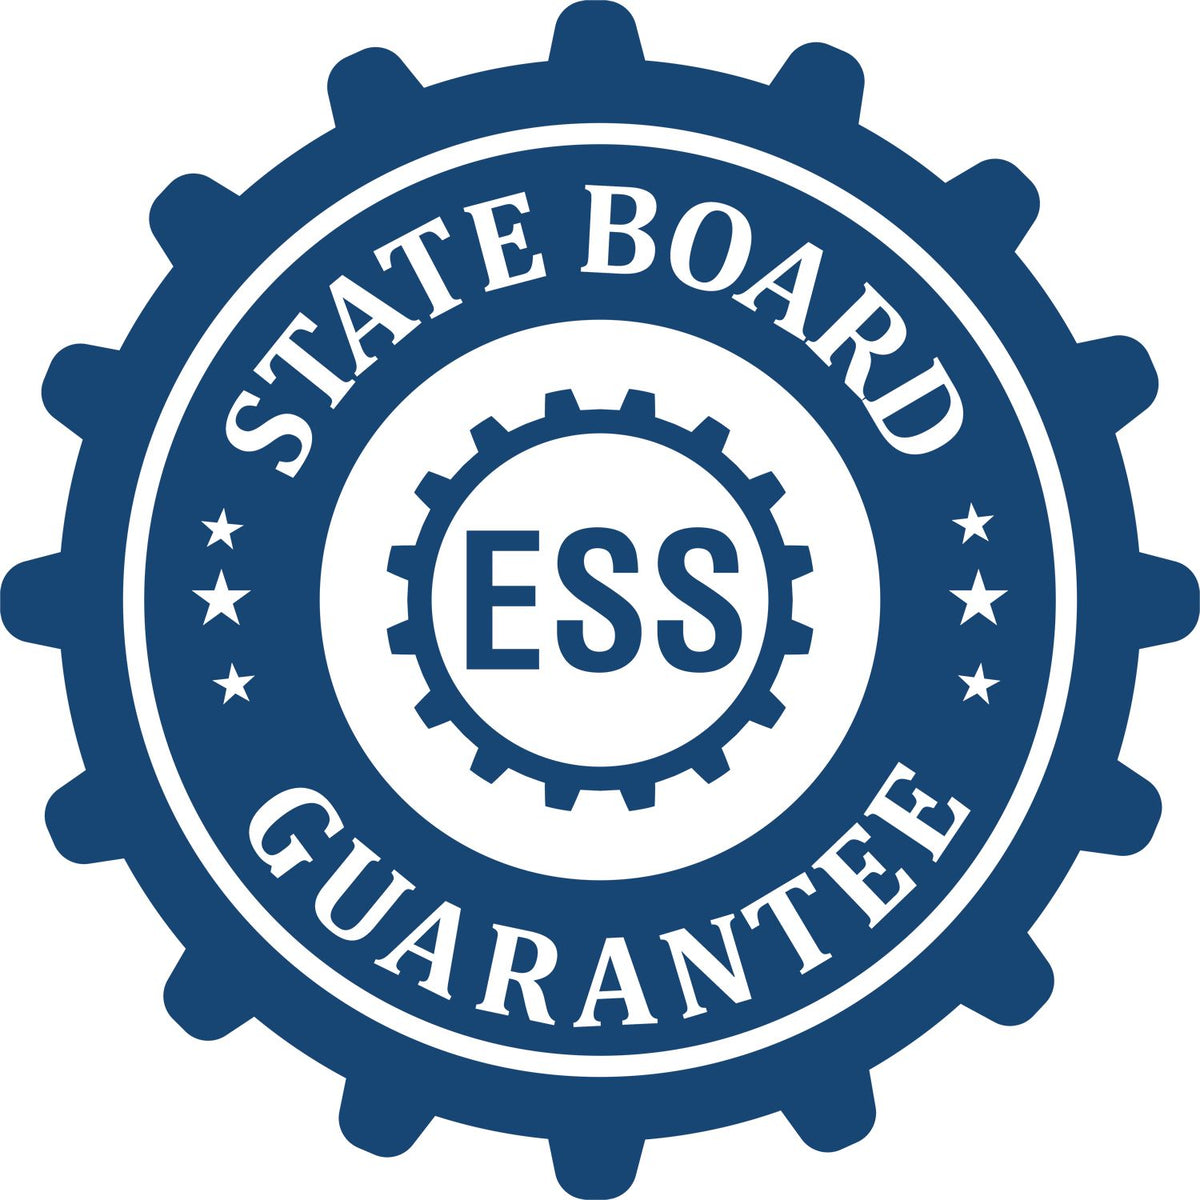 An emblem in a gear shape illustrating a state board guarantee for the Guam Landscape Architectural Seal Stamp product.